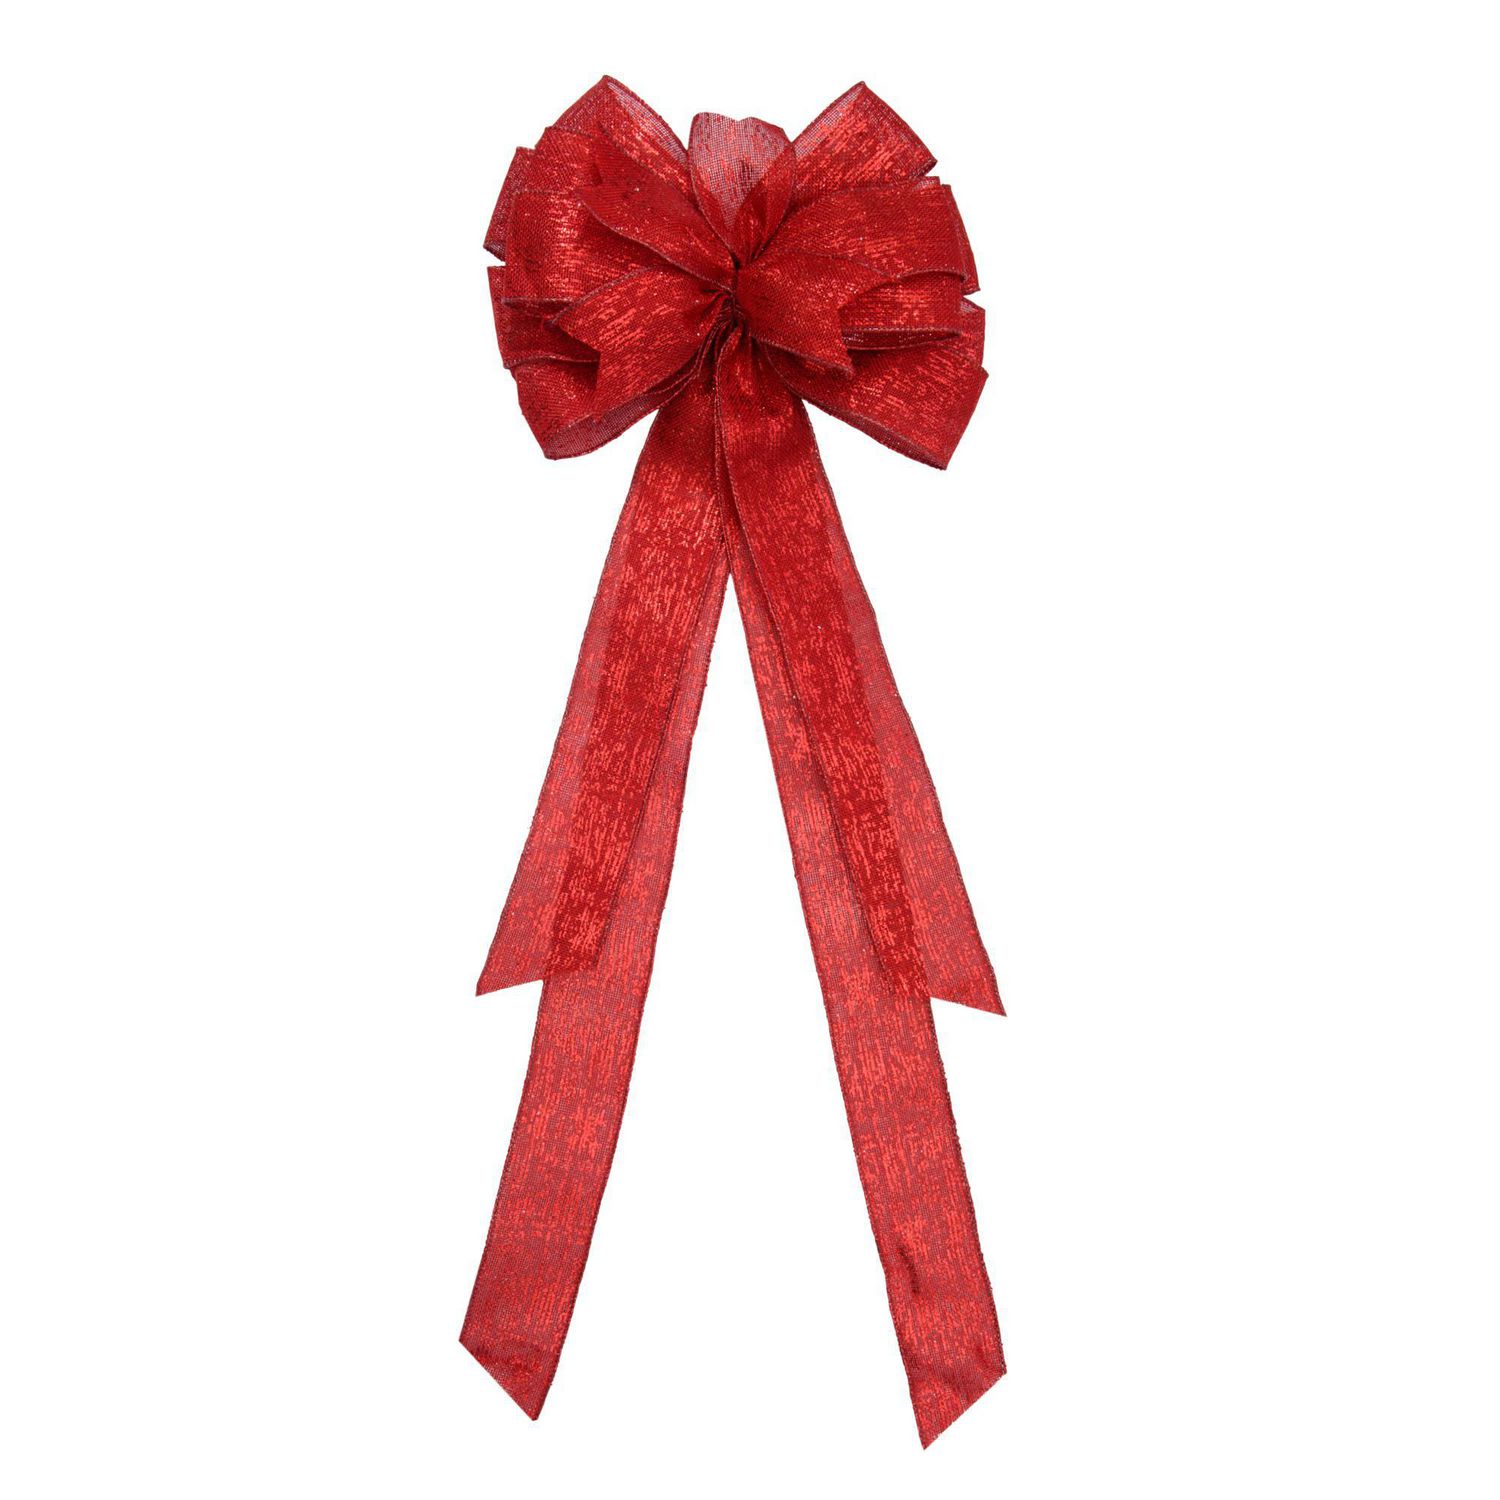 Red Faux Burlap Bow Tree Topper | Walmart Canada